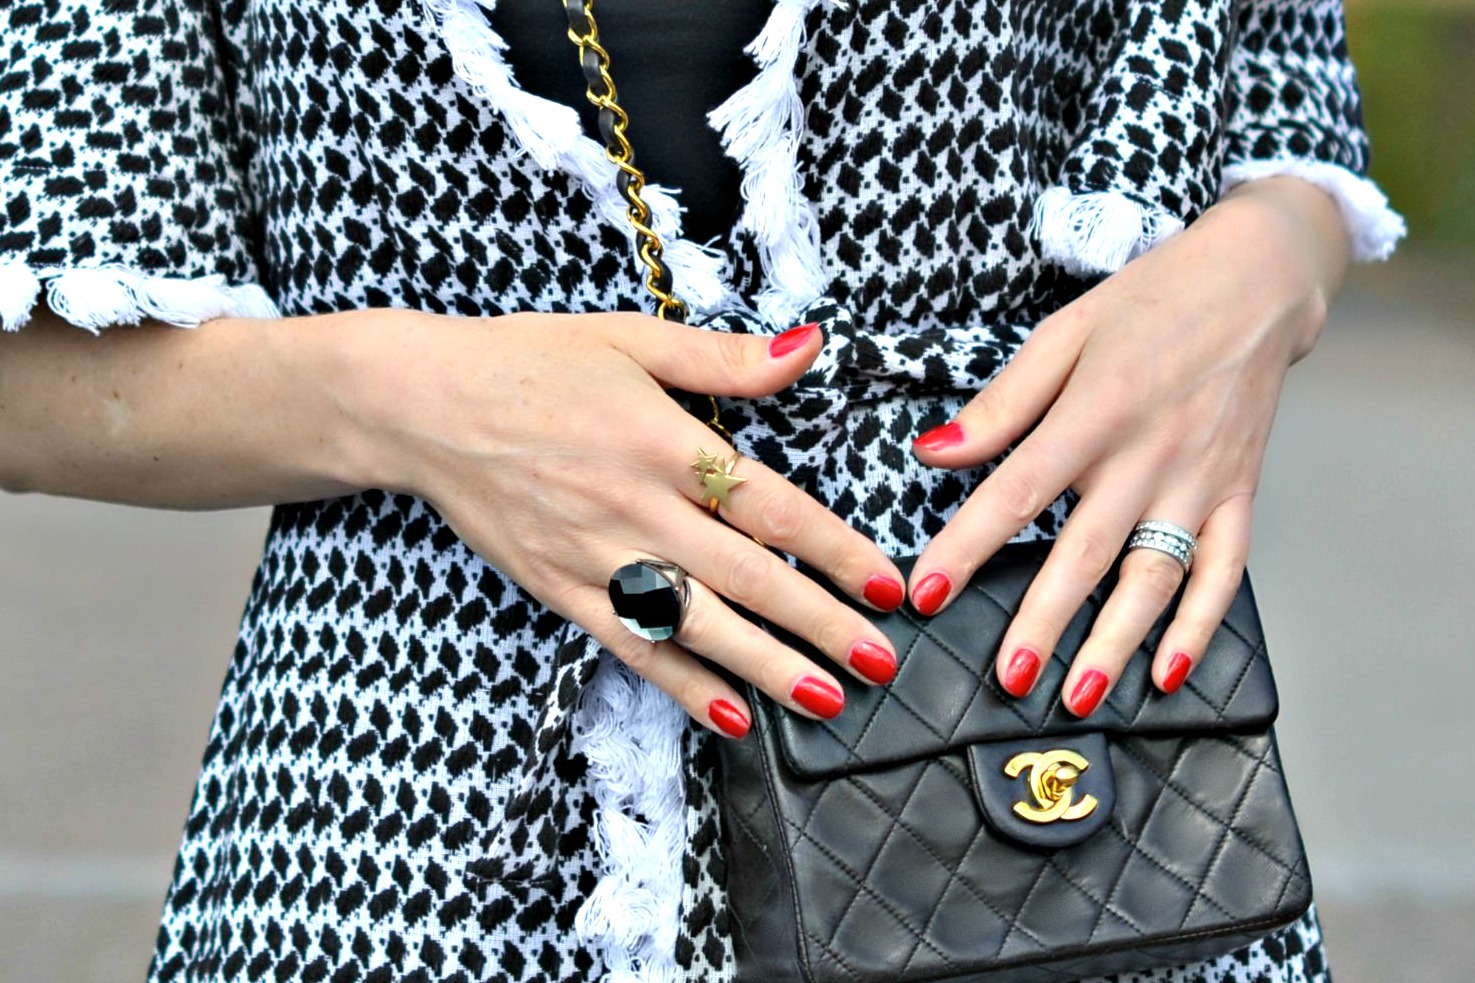 Mixing metals wearing silver,gold & platinum rings together with Chanel mini 2.55 bag